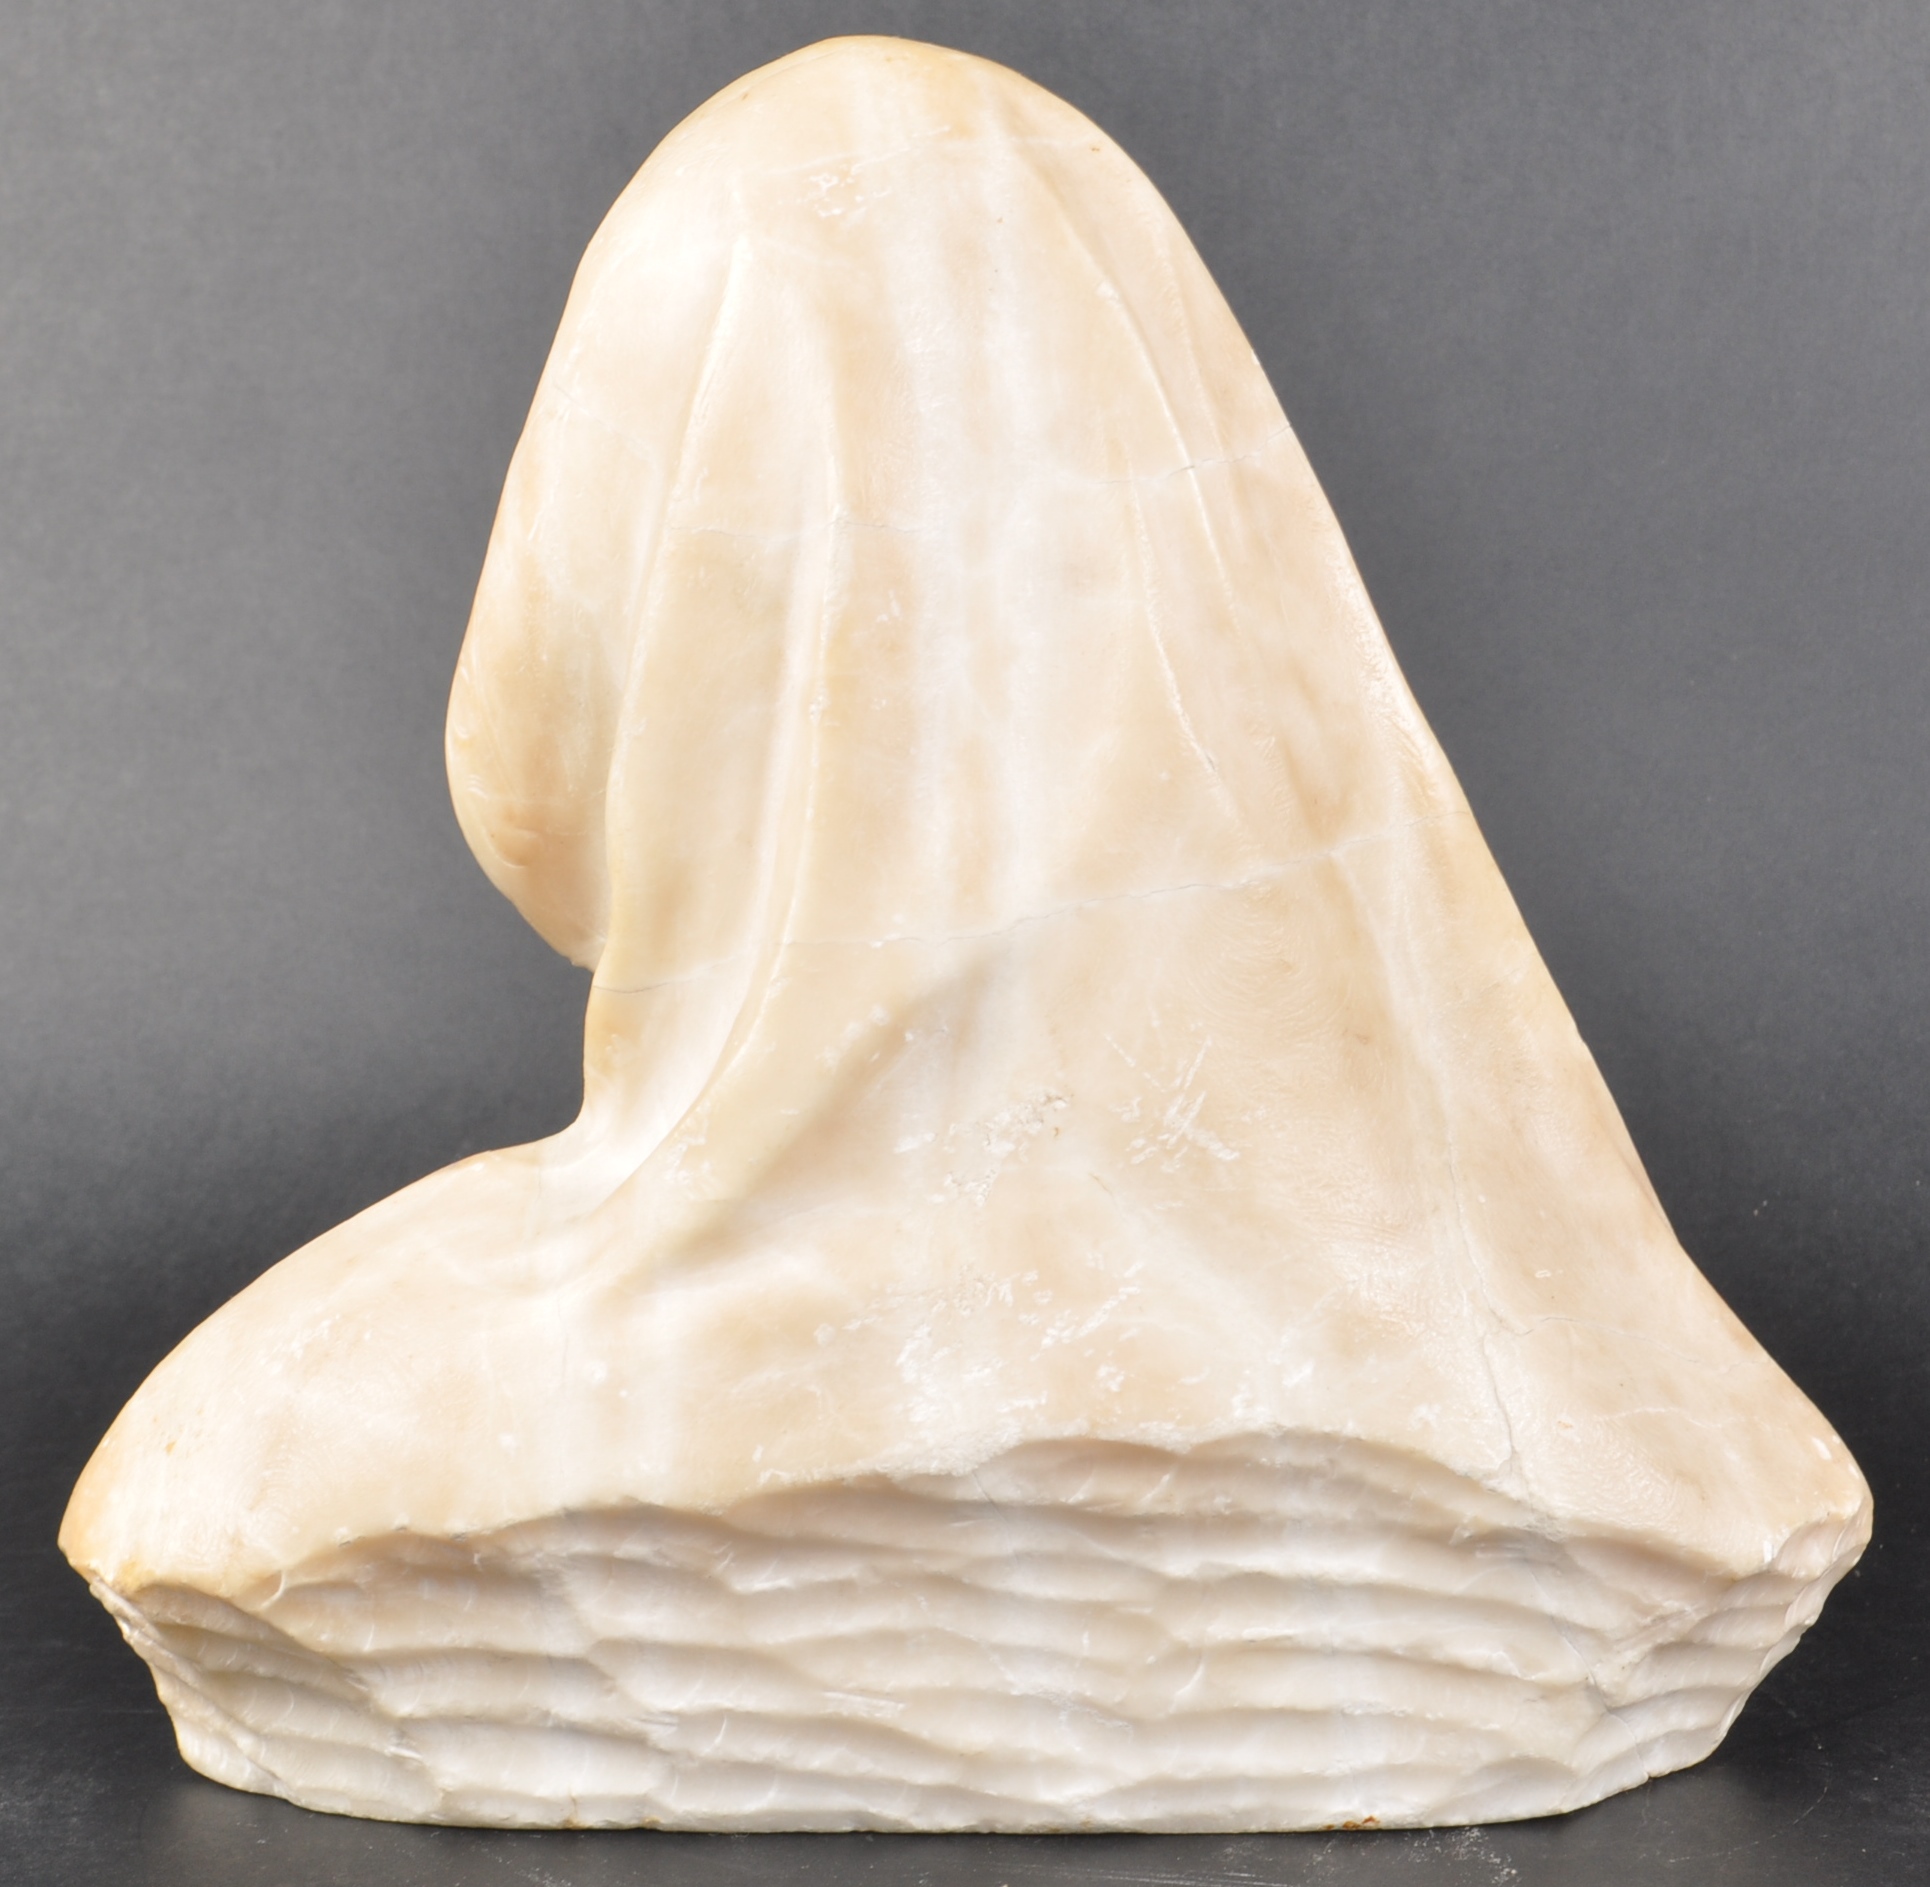 WITHDRAWN FROM SALE 19TH CENTURY WHITE MARBLE ALABASTER FIGURE OF MARY - Image 3 of 3